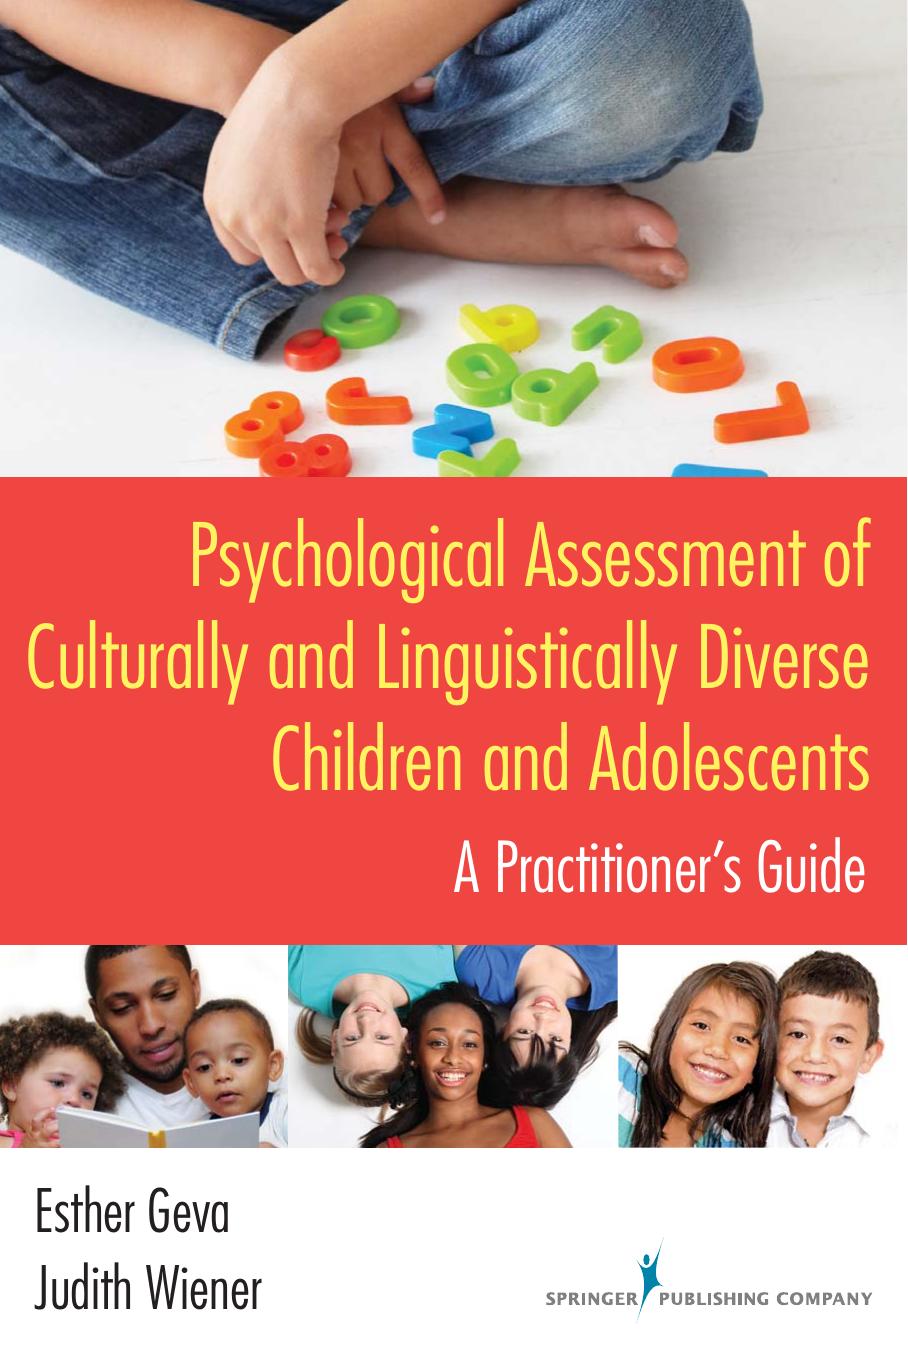 Psychological Assessment of Culturally and Linguistically Diverse Children and Adolescents : A Practitioner's Guide by Esther Geva; Judith Wiener